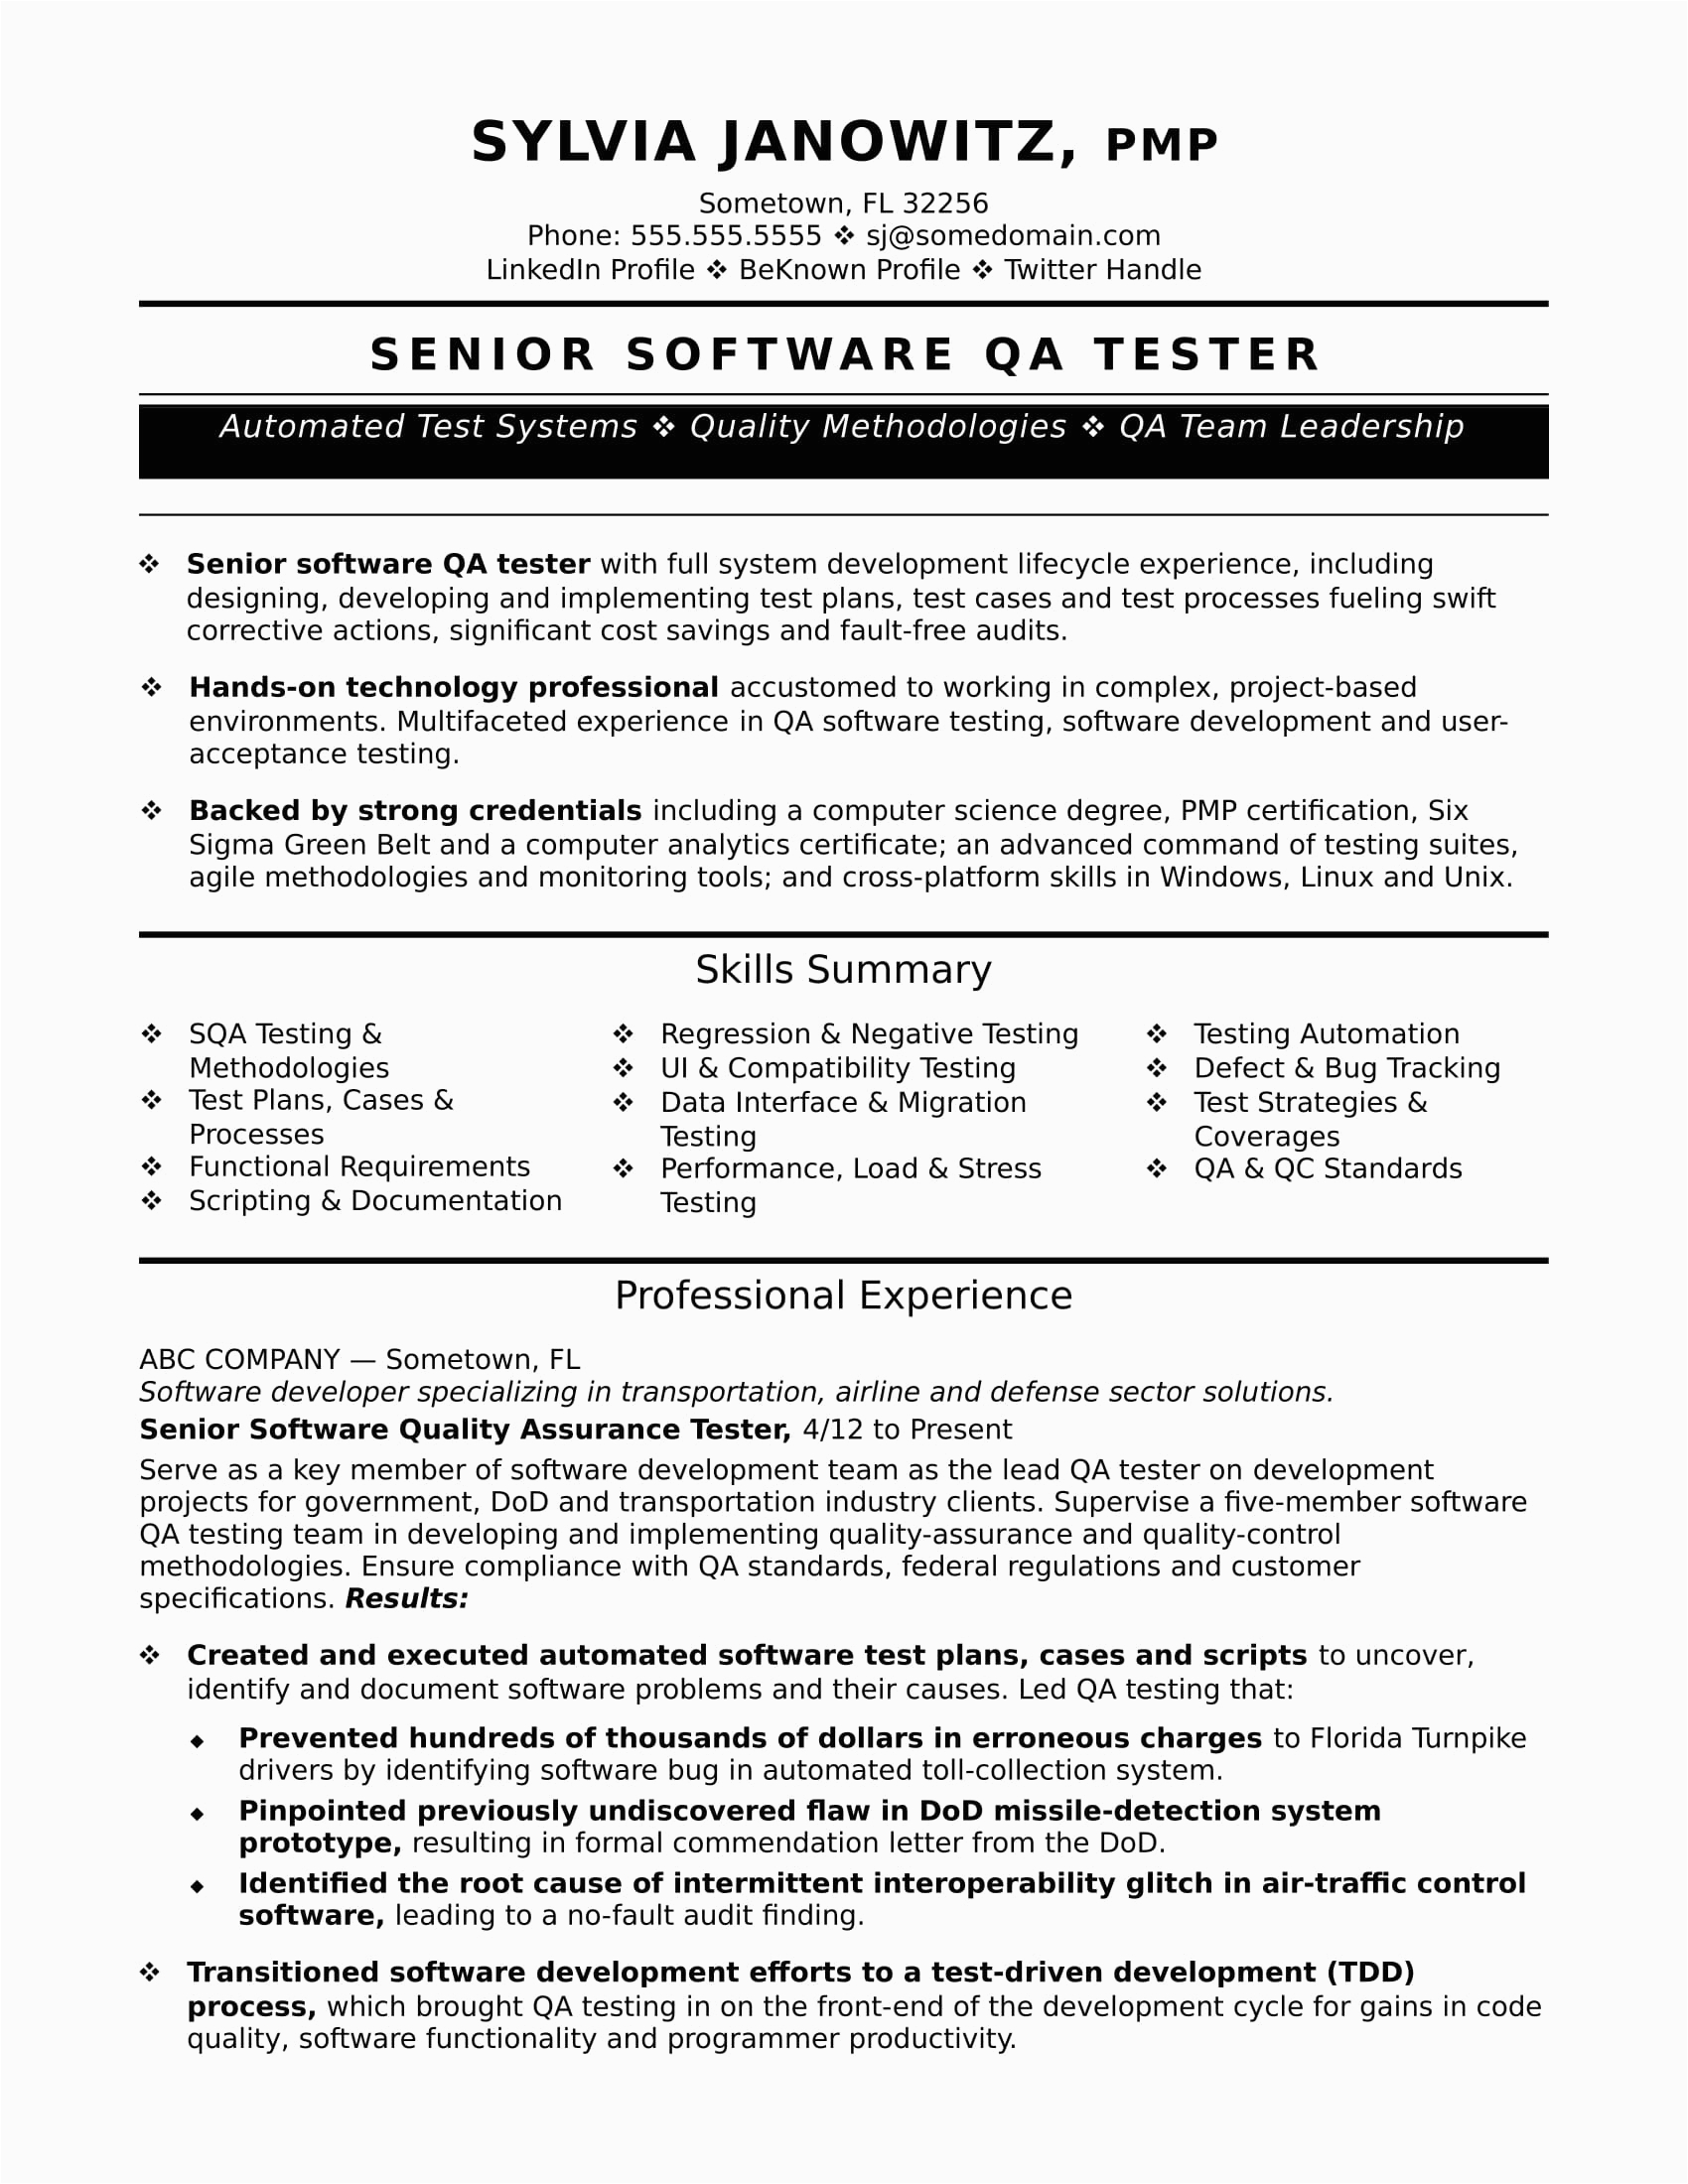 Sample Resume format for Experienced software Test Engineer Experienced Qa software Tester Resume Sample